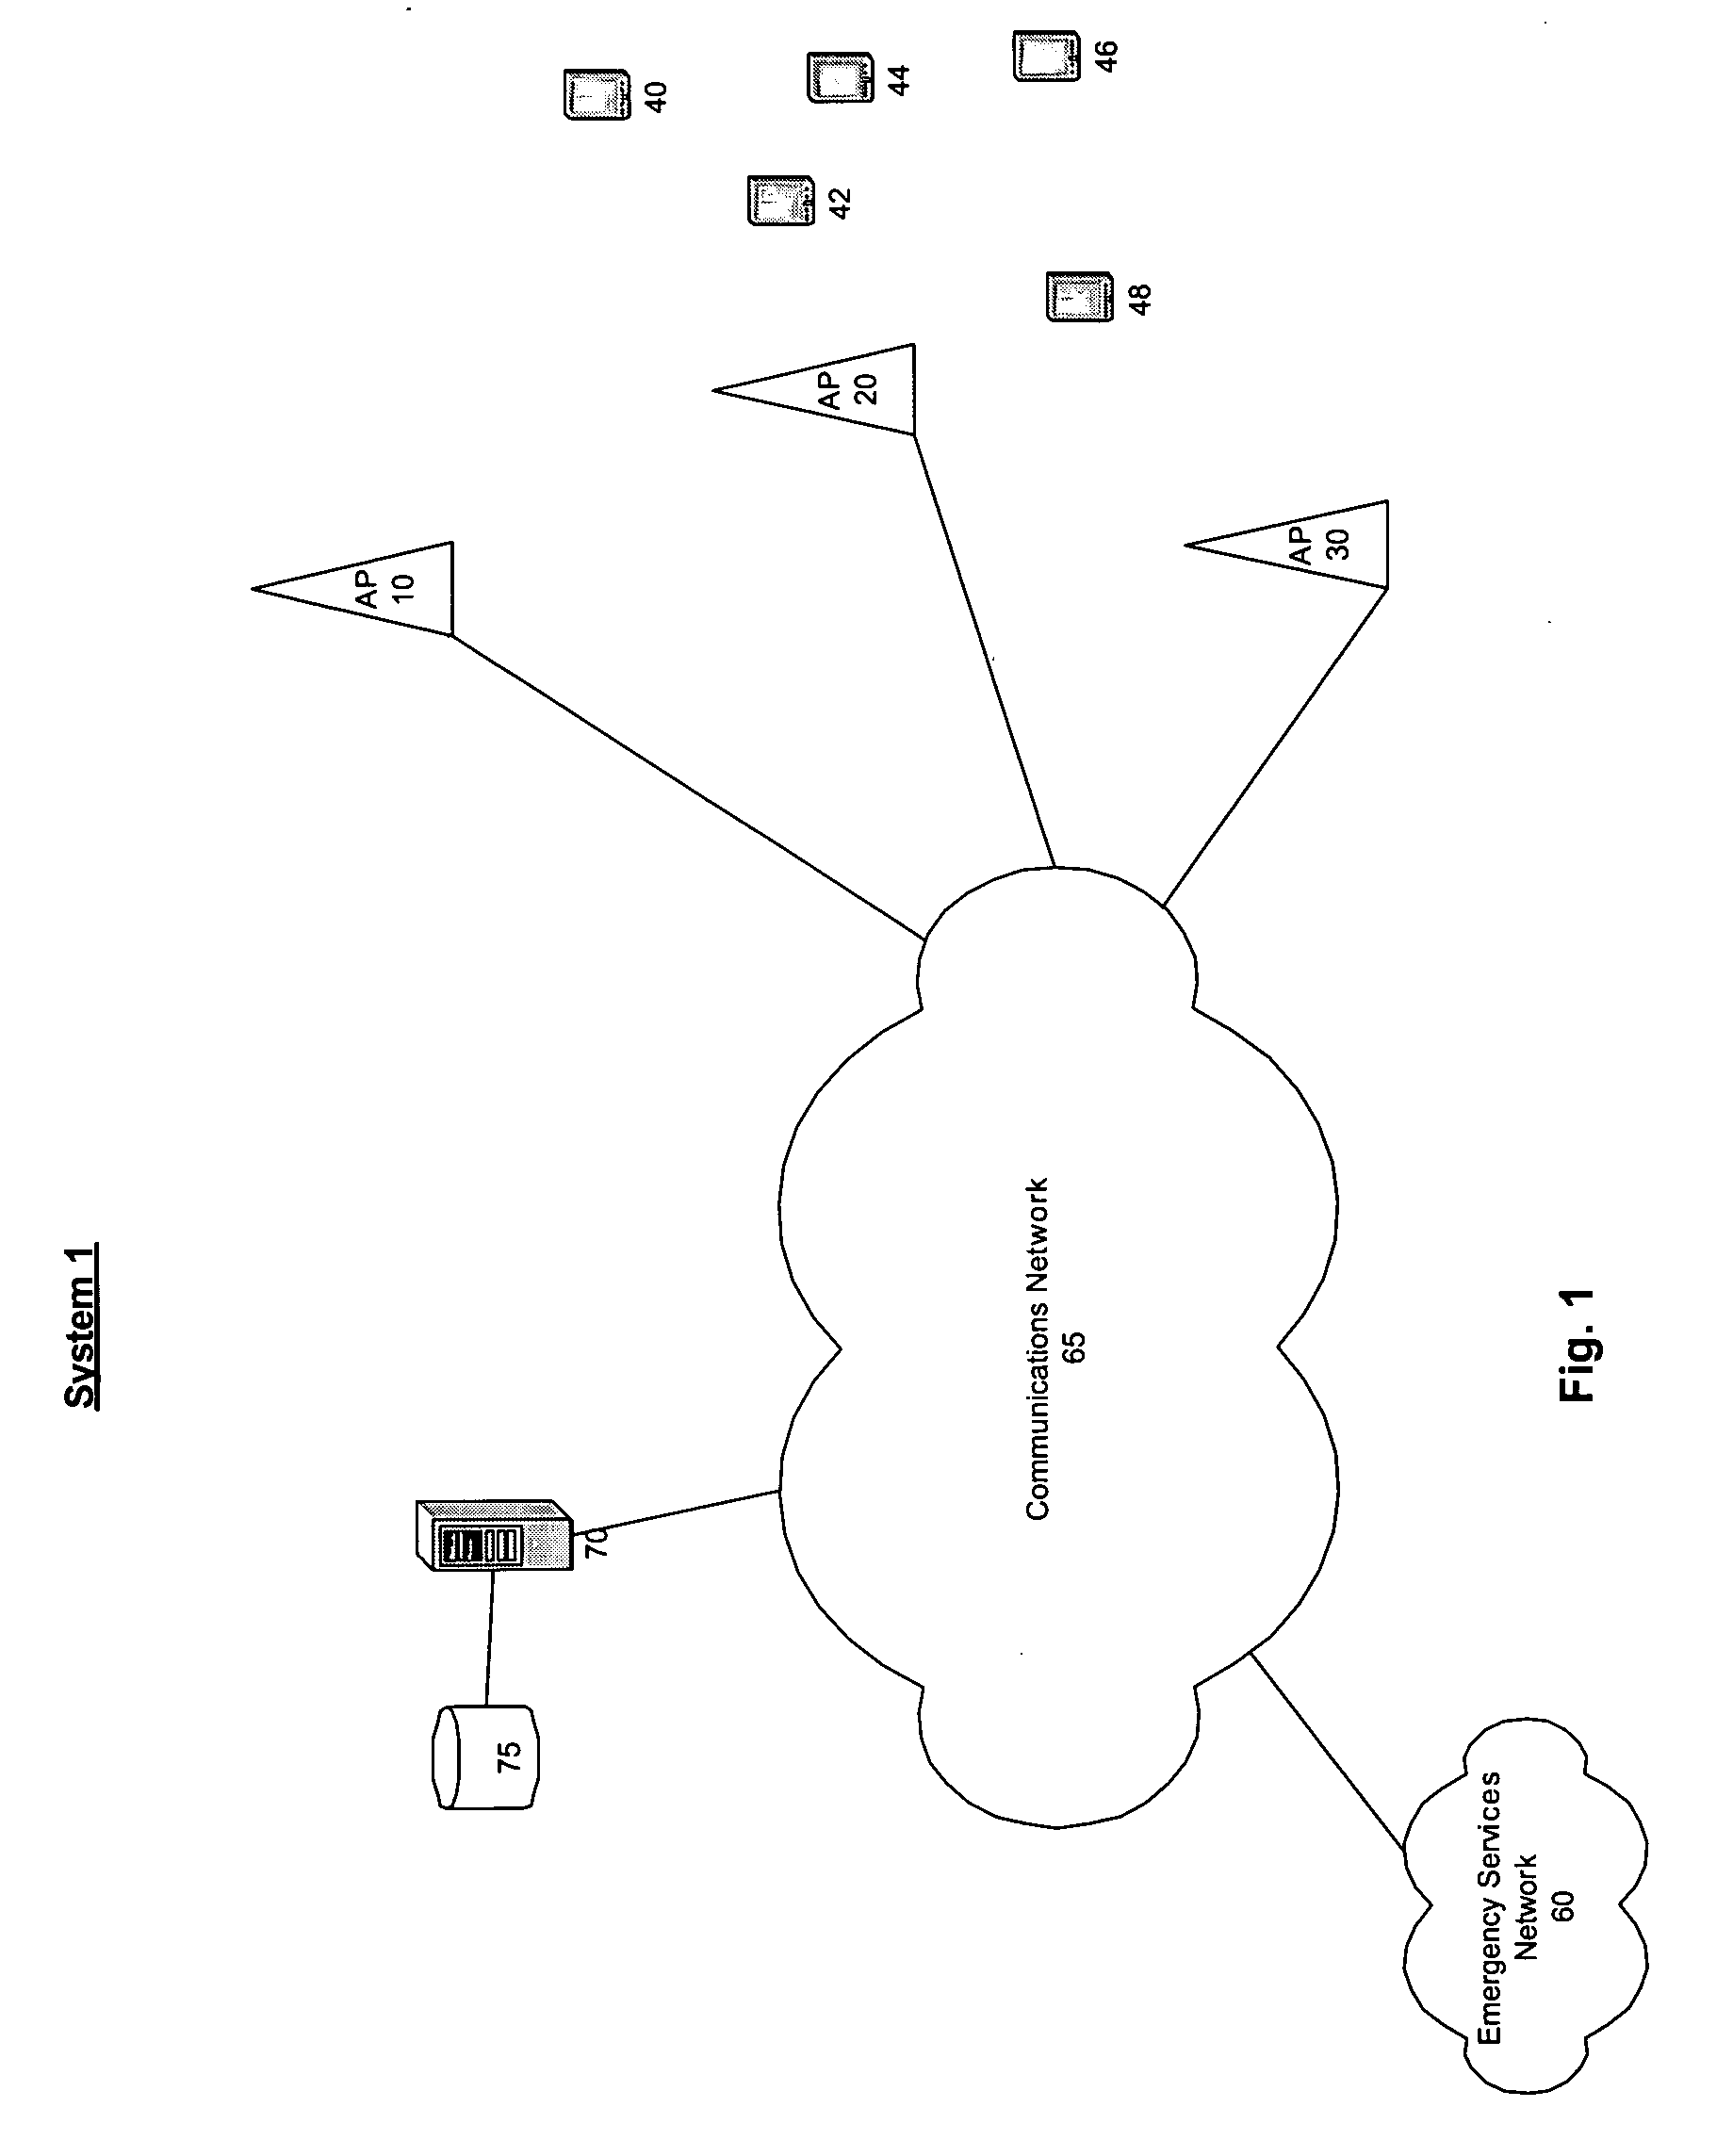 System and method for prioritizing emergency communications in a wireless network